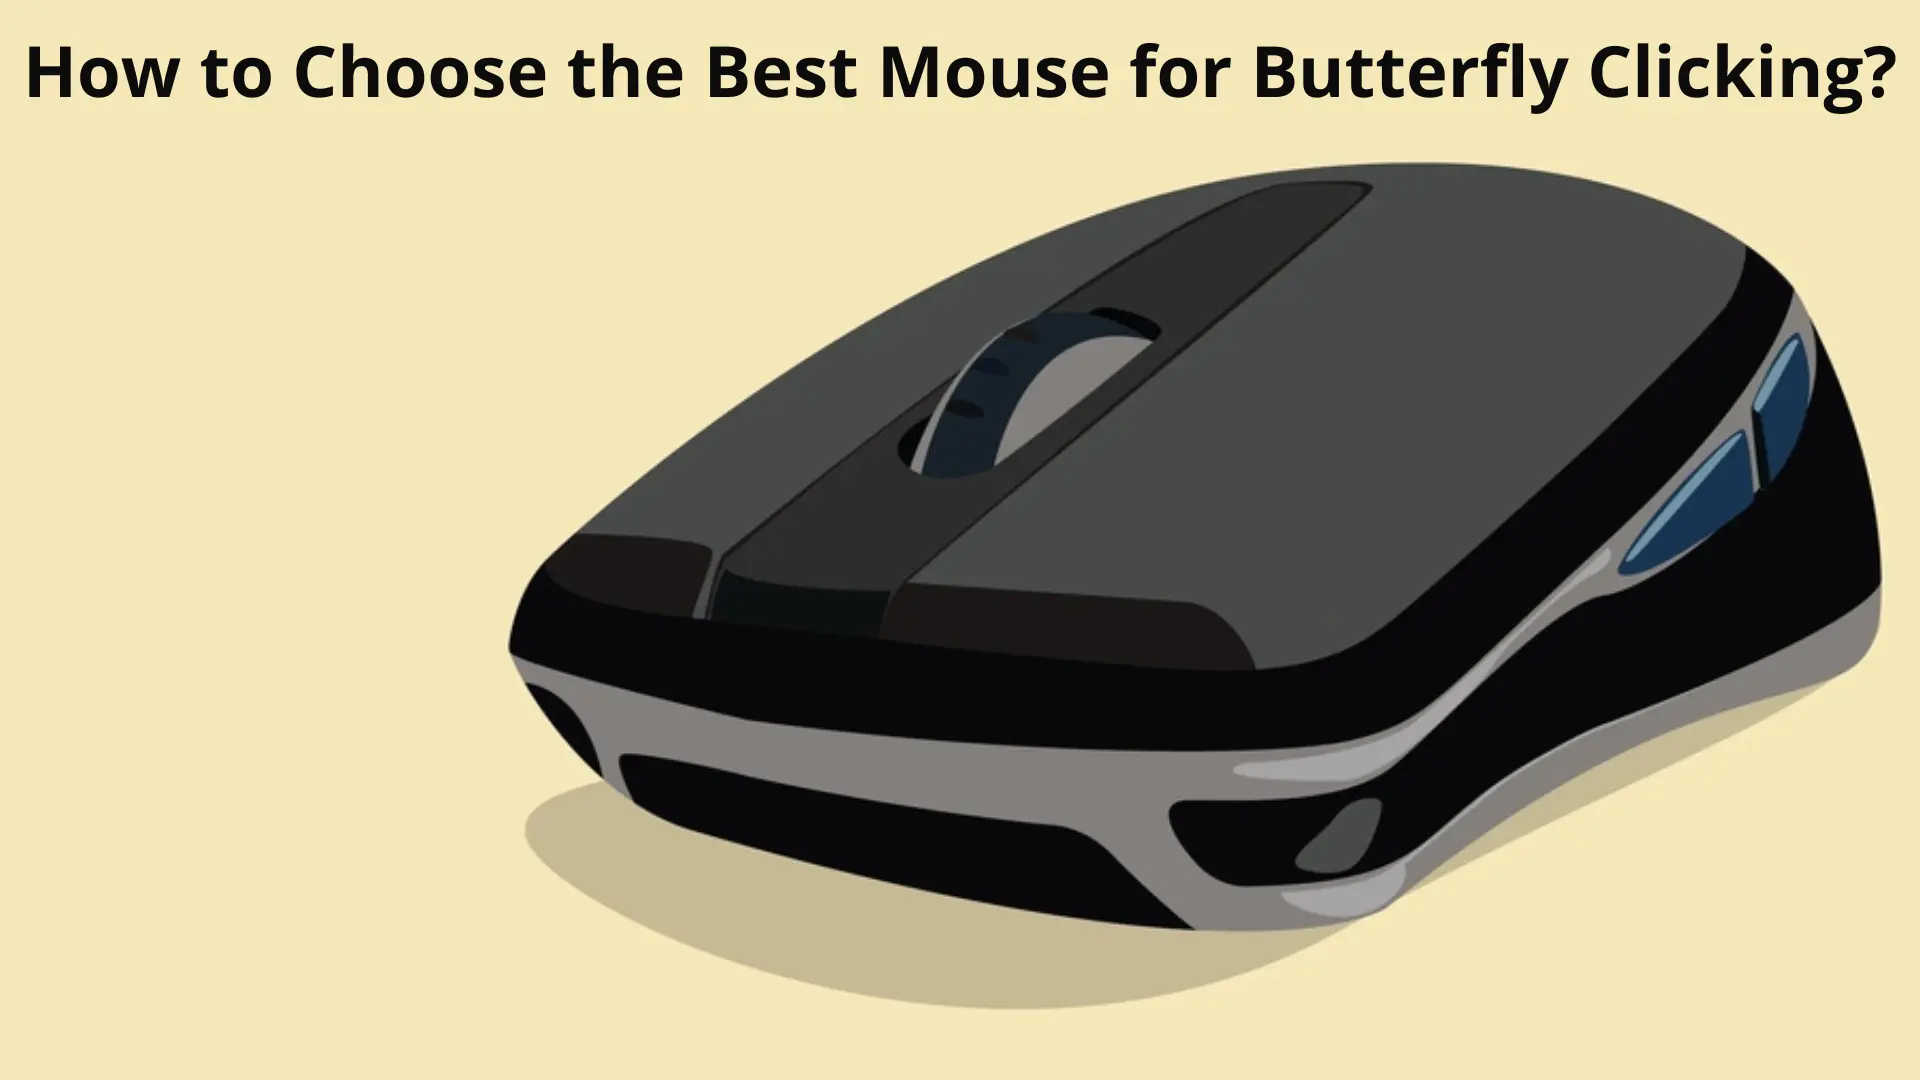 How to Choose the Best Mouse for Butterfly Clicking